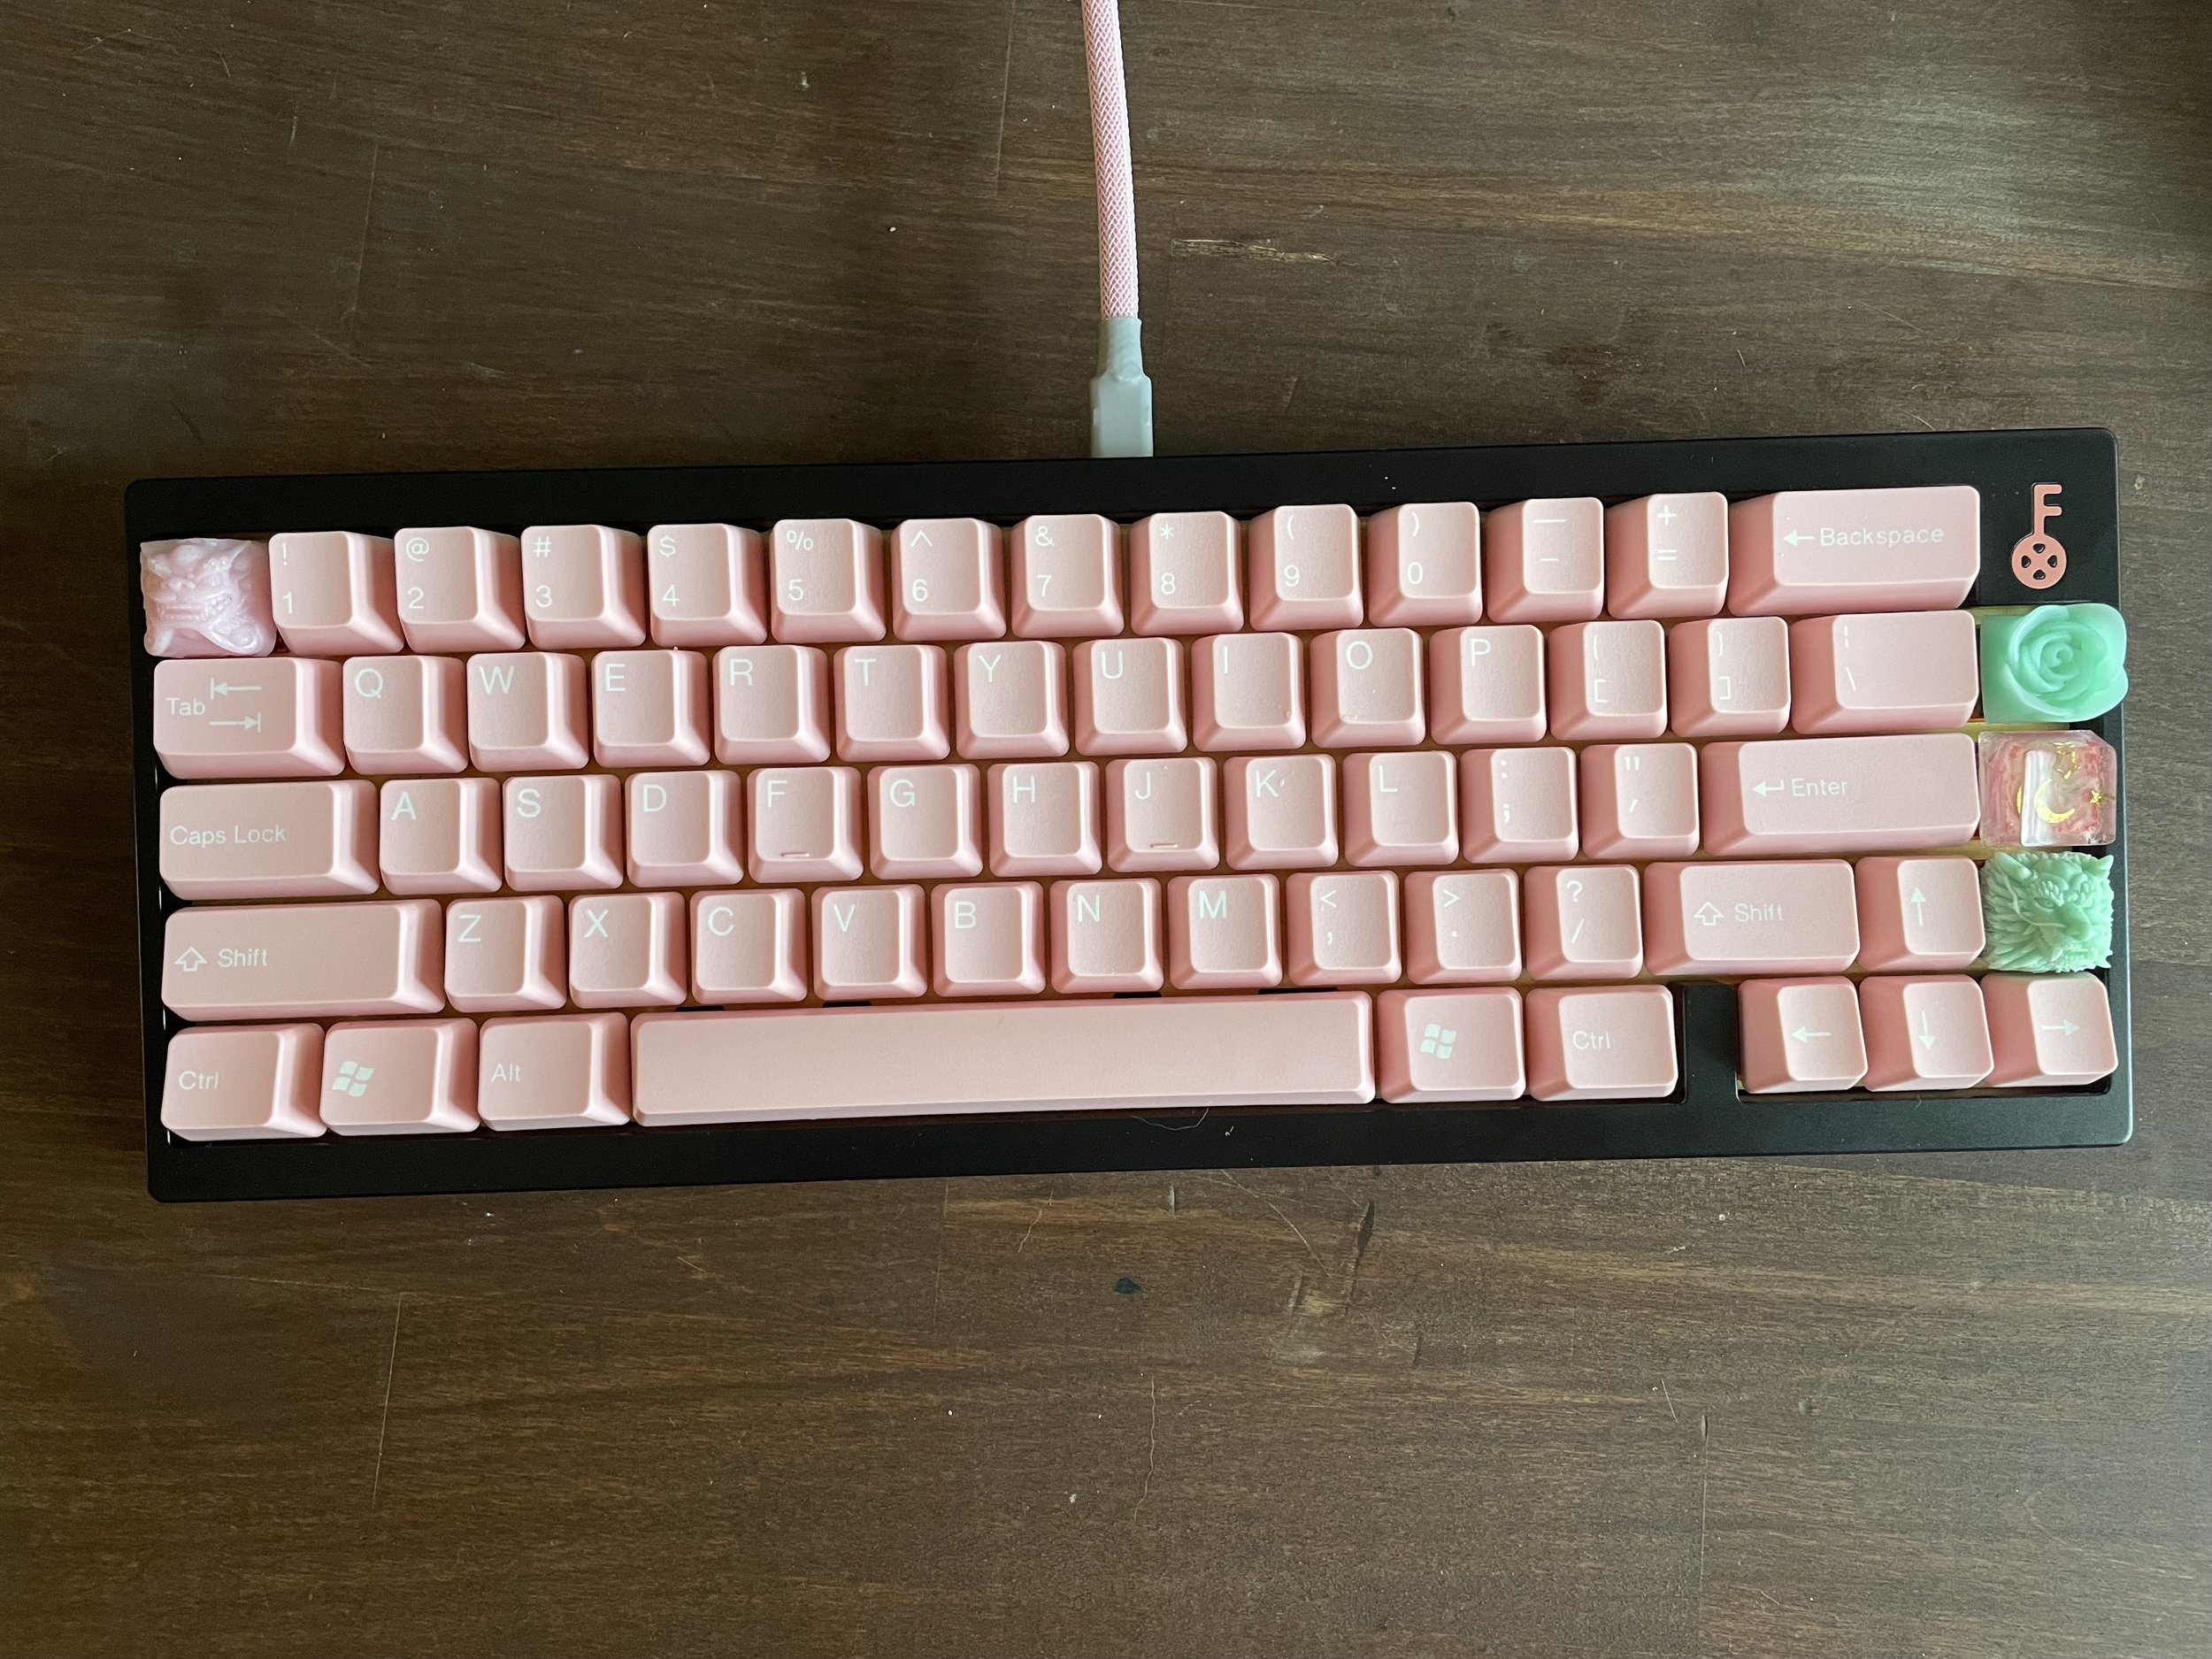  Black Key65 with Taihao Pink Love keycaps 